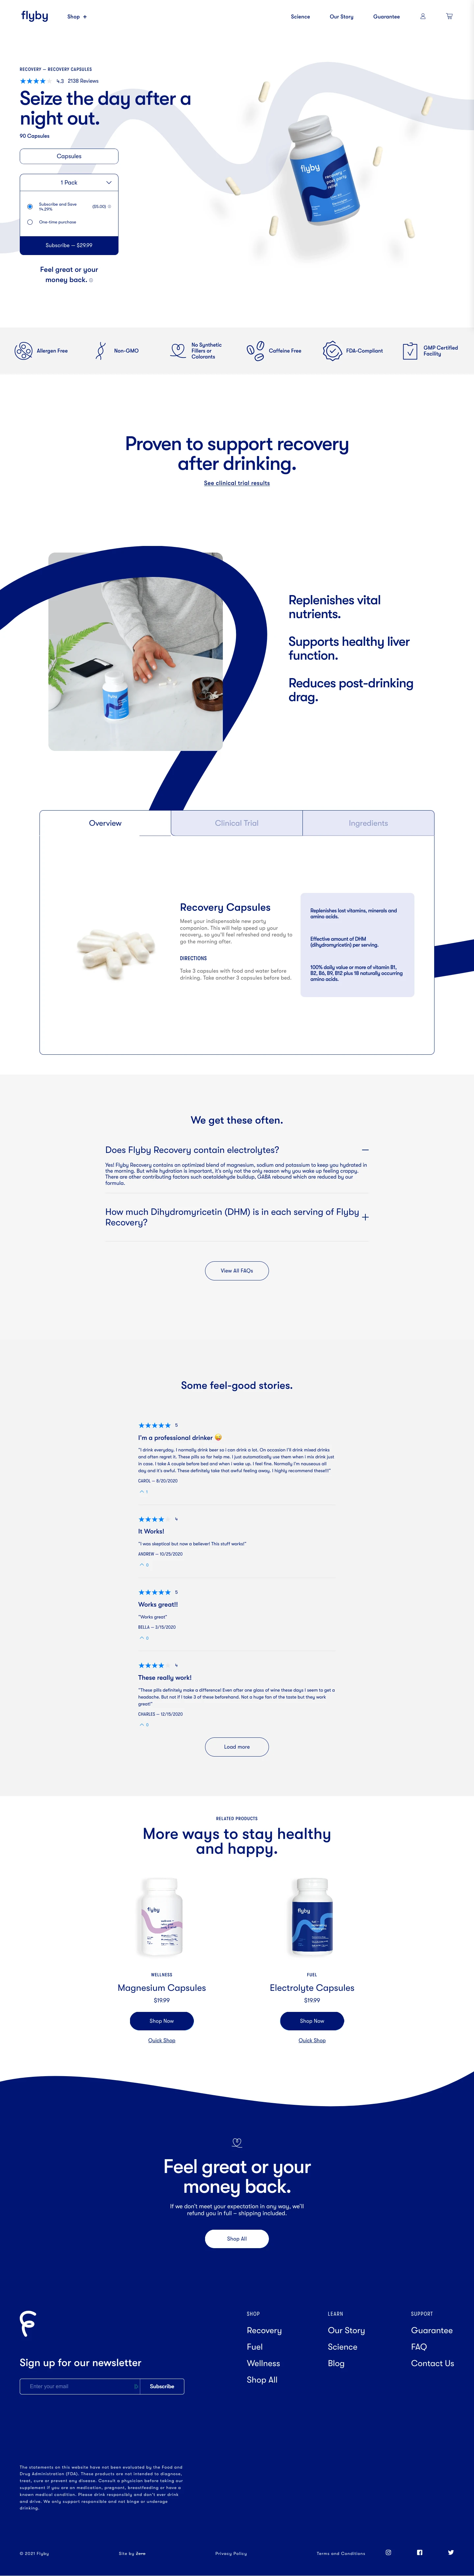 Flyby Landing Page Example: Science-backed, effective wellness aids to help you feel good, and do more. We put in exhaustive research and testing into all of our formulas to make sure they’re safe and effective.